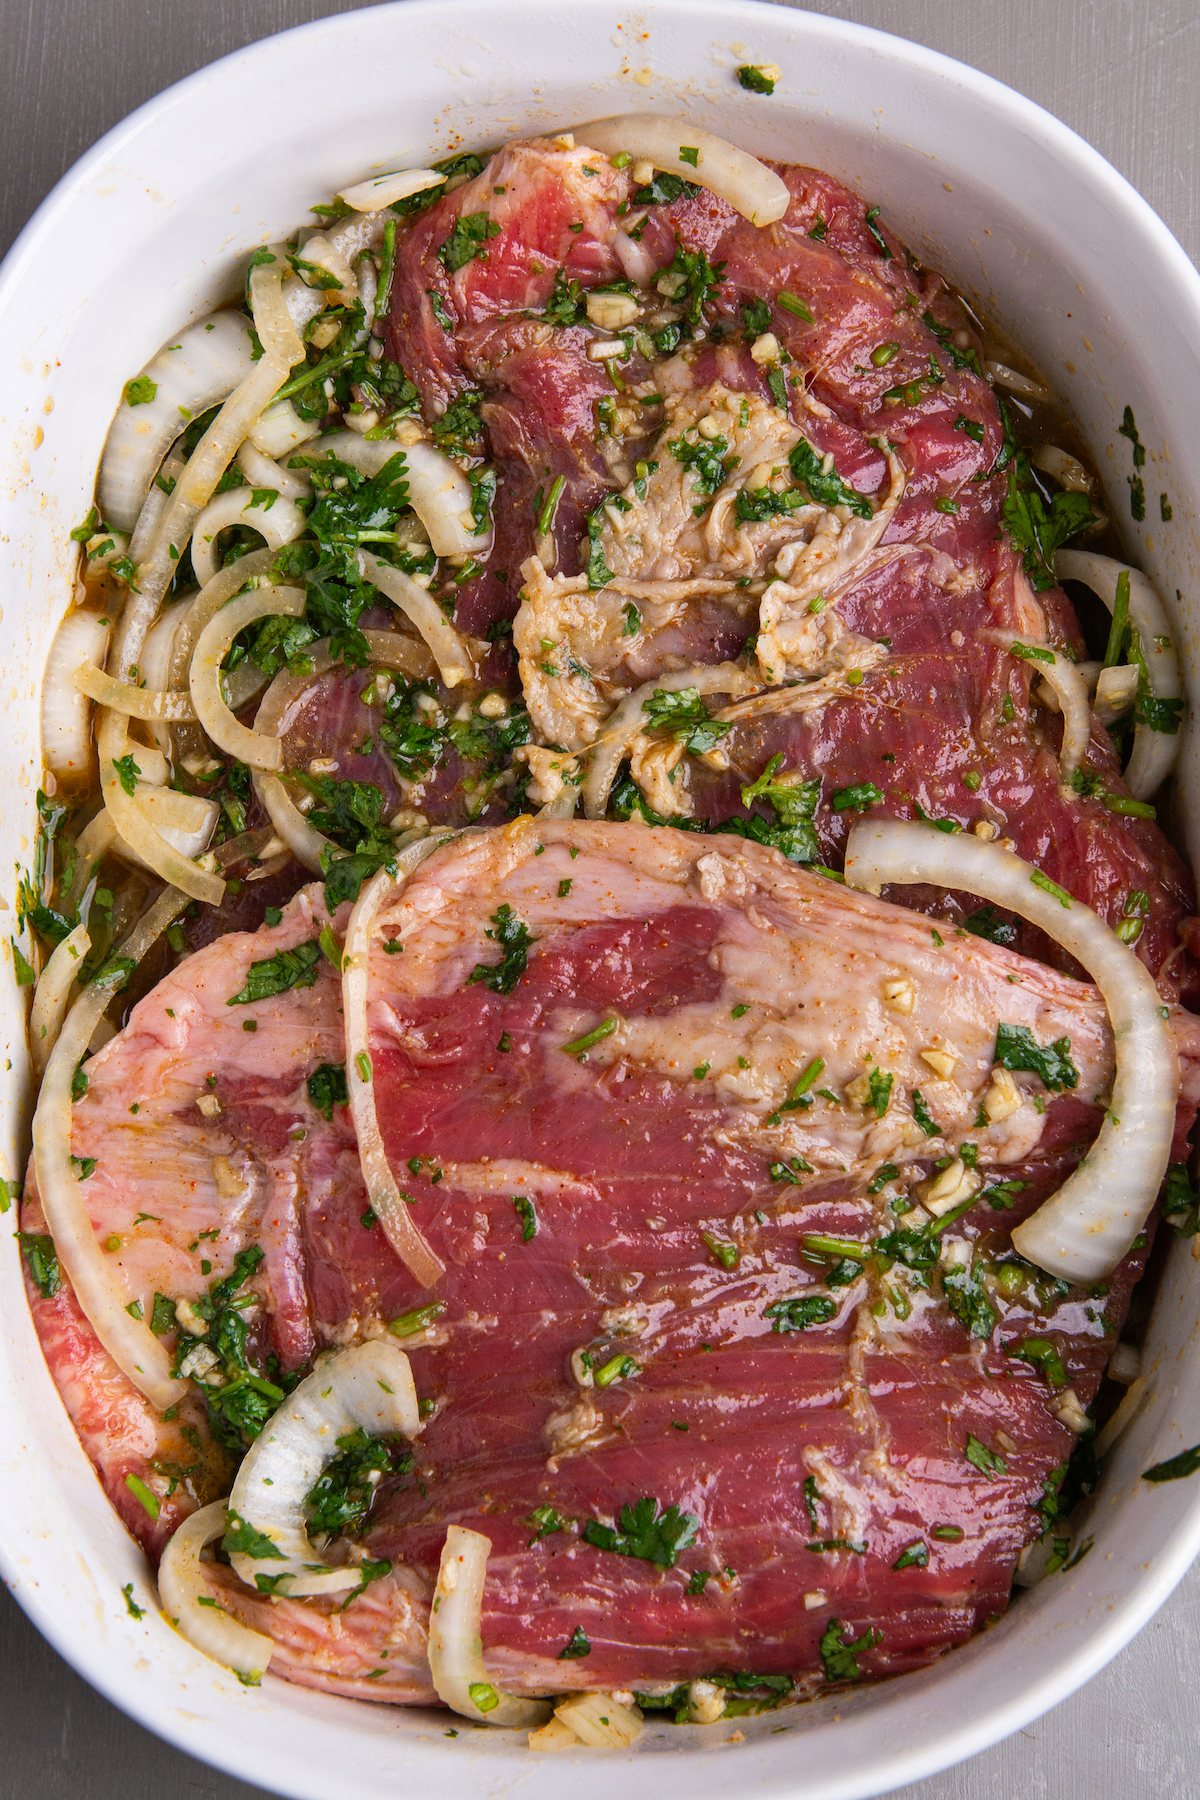 A deep ceramic roasting dish with two pieces of flank steak marinating in a carne asada marinade made with sliced white onion, chopped cilantro, and garlic.